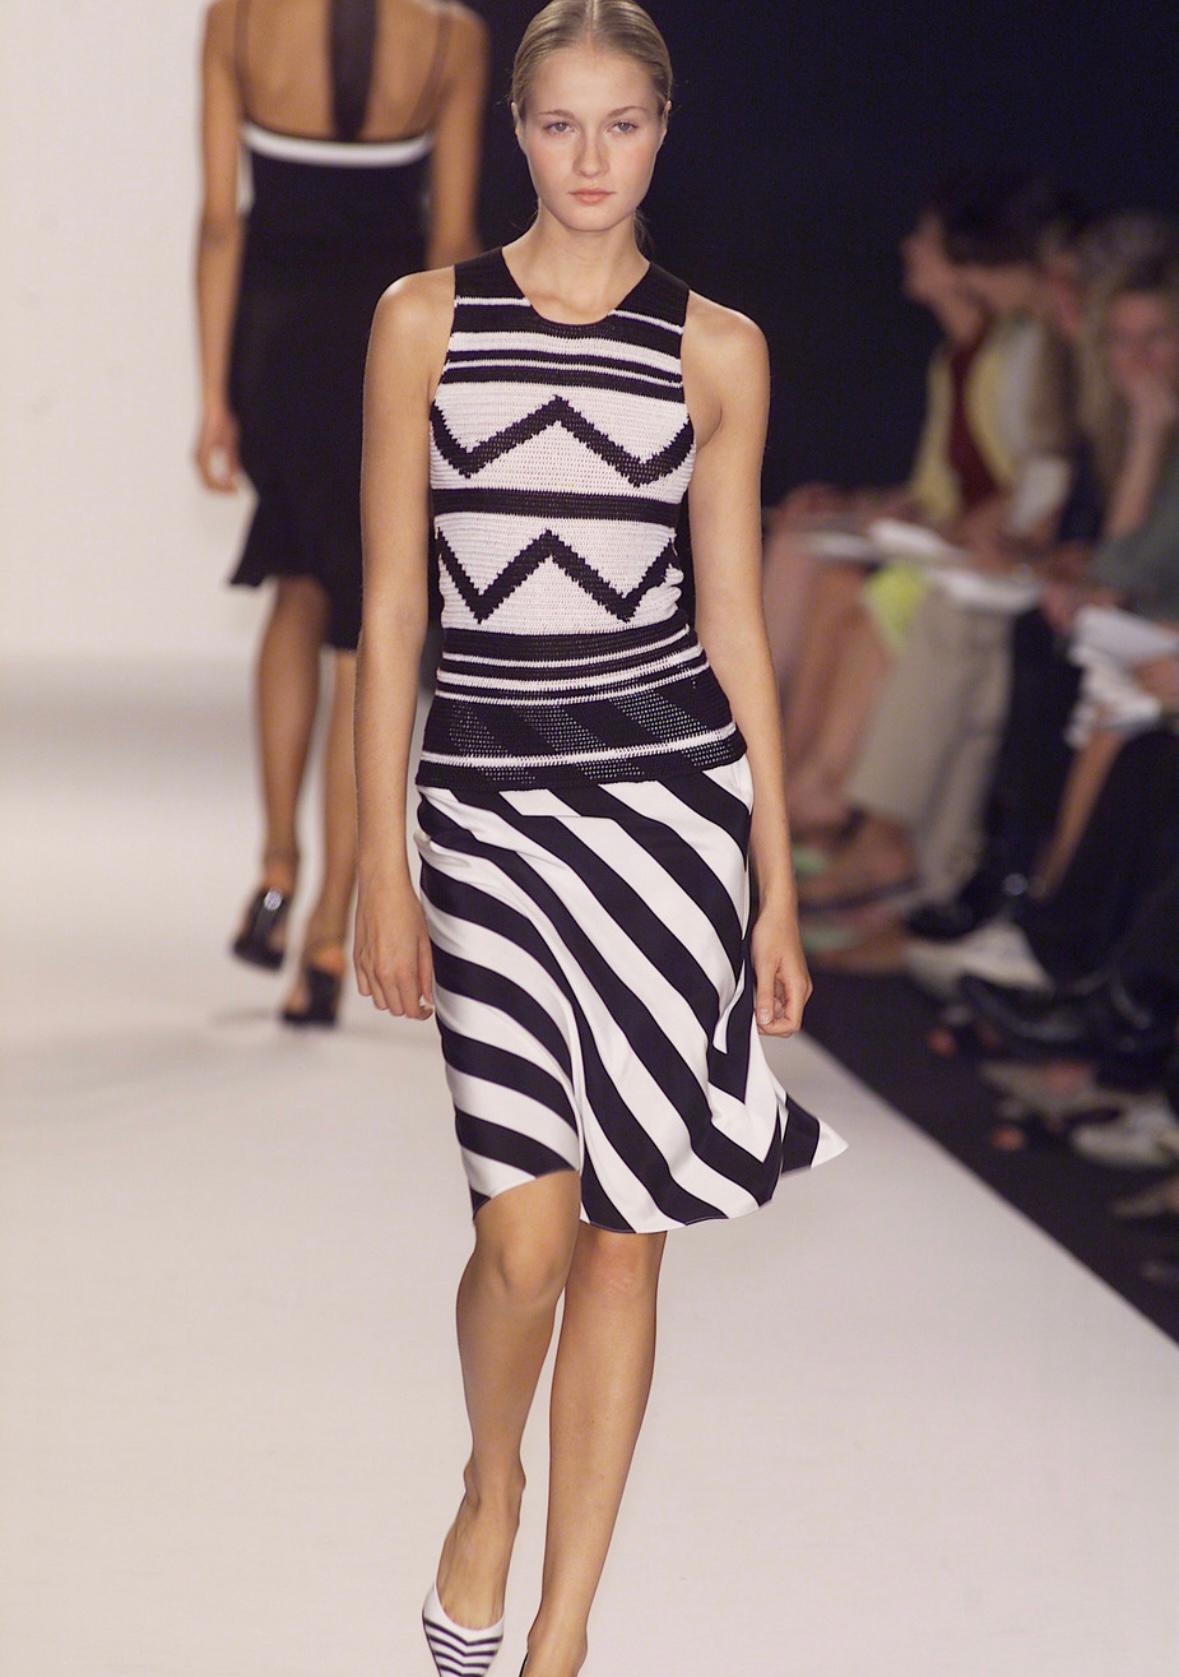 Introducing a fabulous black and white knit tank top from Ralph Lauren Purple Label's Spring/Summer 2001 collection. This top made its debut on the season's runway as part of look 21, modeled by Danita Angell.. This entirely knit top features a